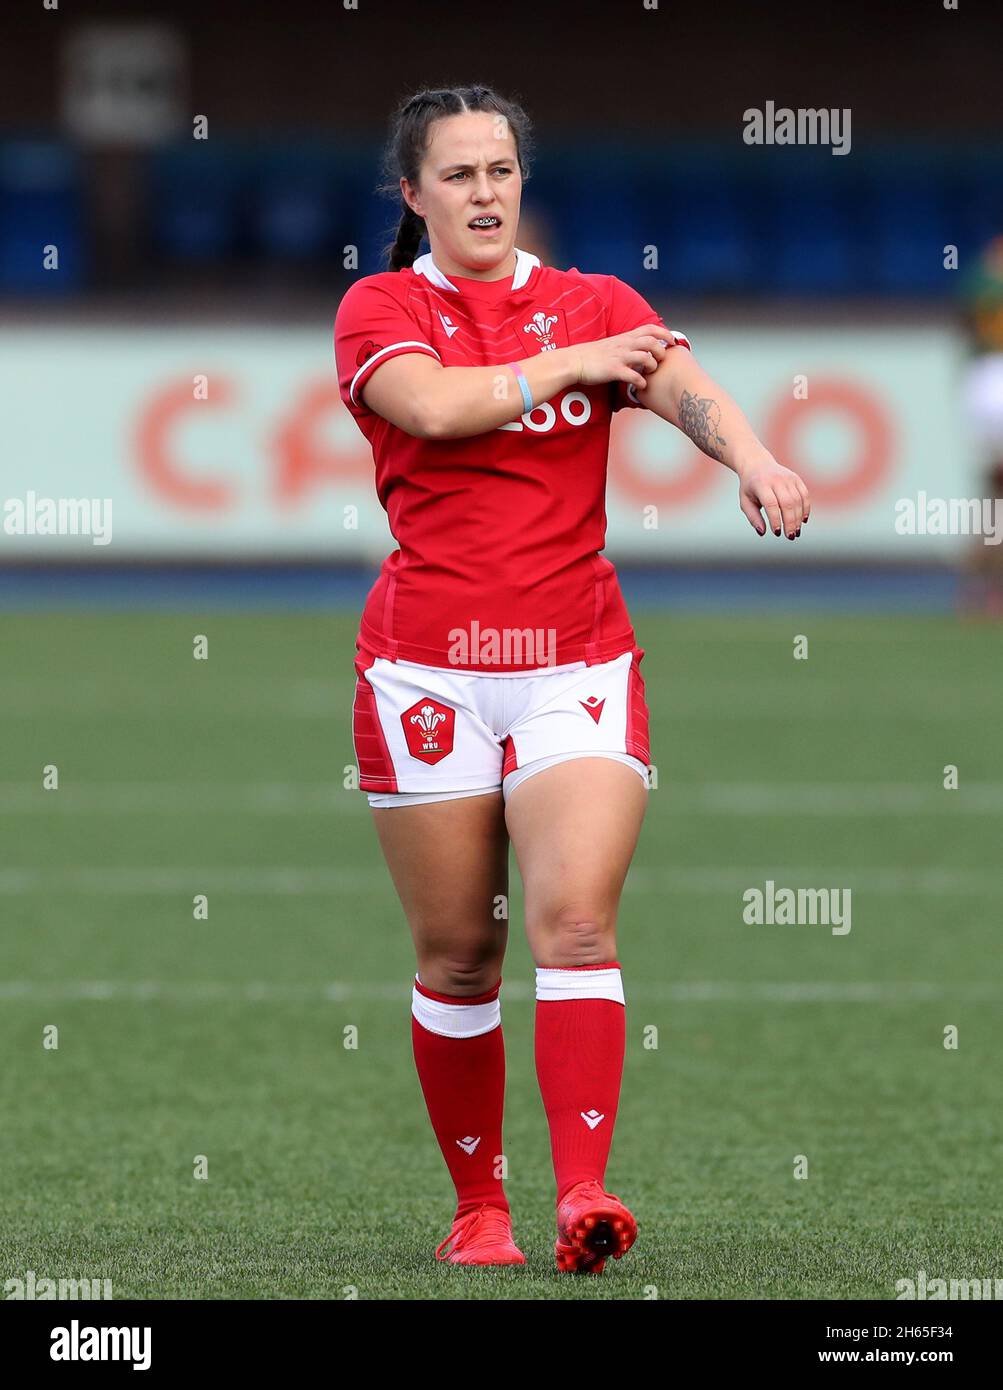 Wales' Ffion Lewis during the Autumn International match at Cardiff Arms park, Cardiff. Picture date: Saturday November 13, 2021. See PA story RUGBYU Wales Women. Photo credit should read: Bradley Collyer/PA Wire. RESTRICTIONS: Use subject to restrictions. Editorial use only, no commercial use without prior consent from rights holder. Stock Photo